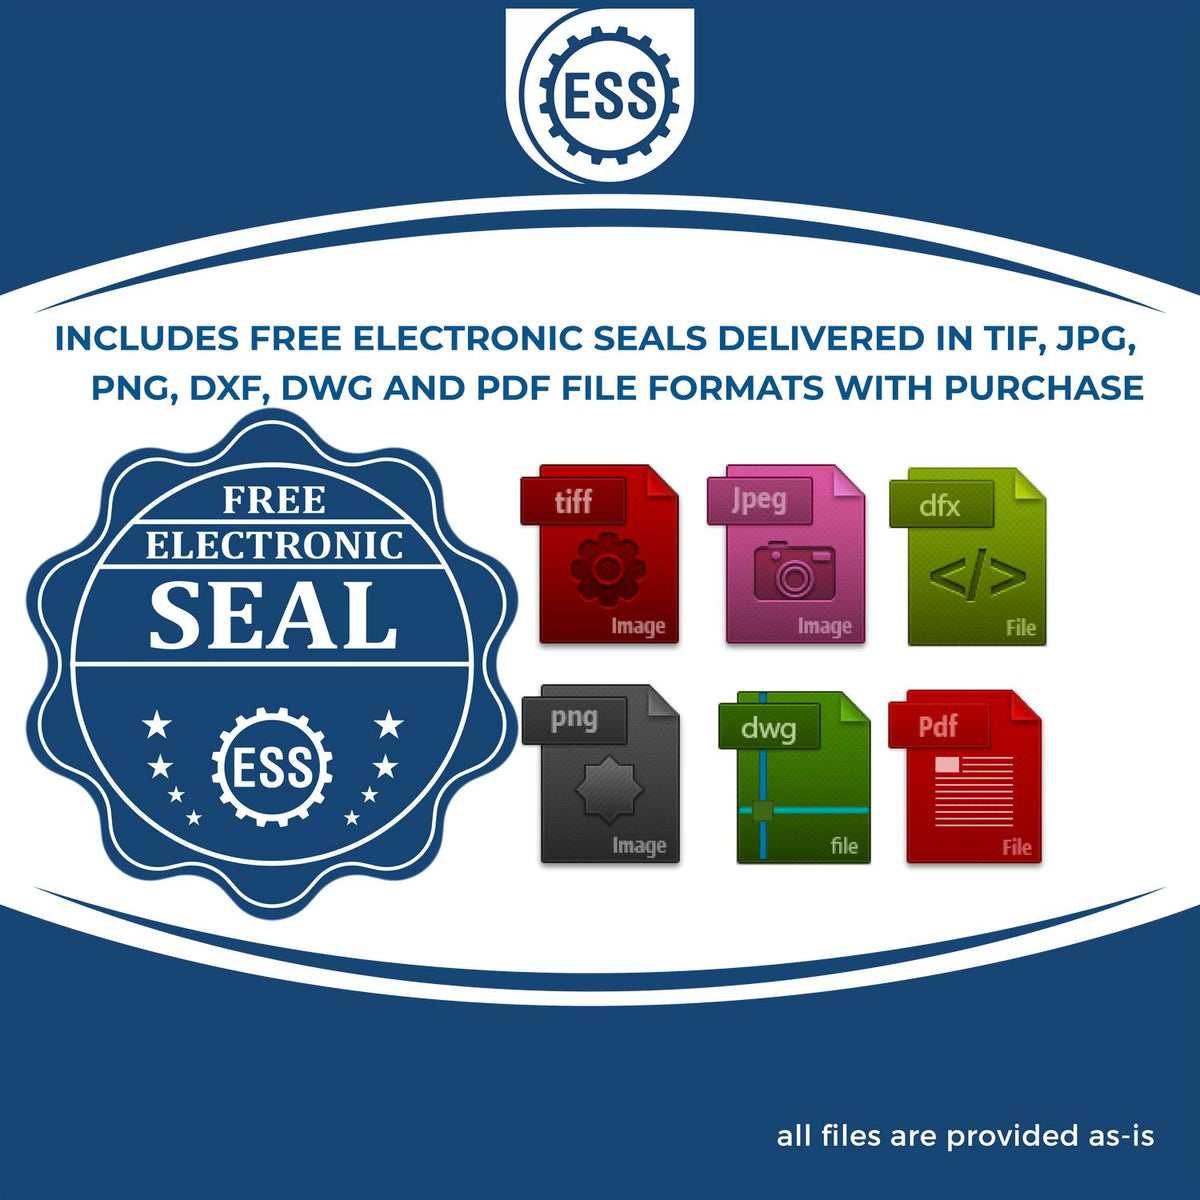 An infographic for the free electronic seal for the Slim Pre-Inked Delaware Landscape Architect Seal Stamp illustrating the different file type icons such as DXF, DWG, TIF, JPG and PNG.